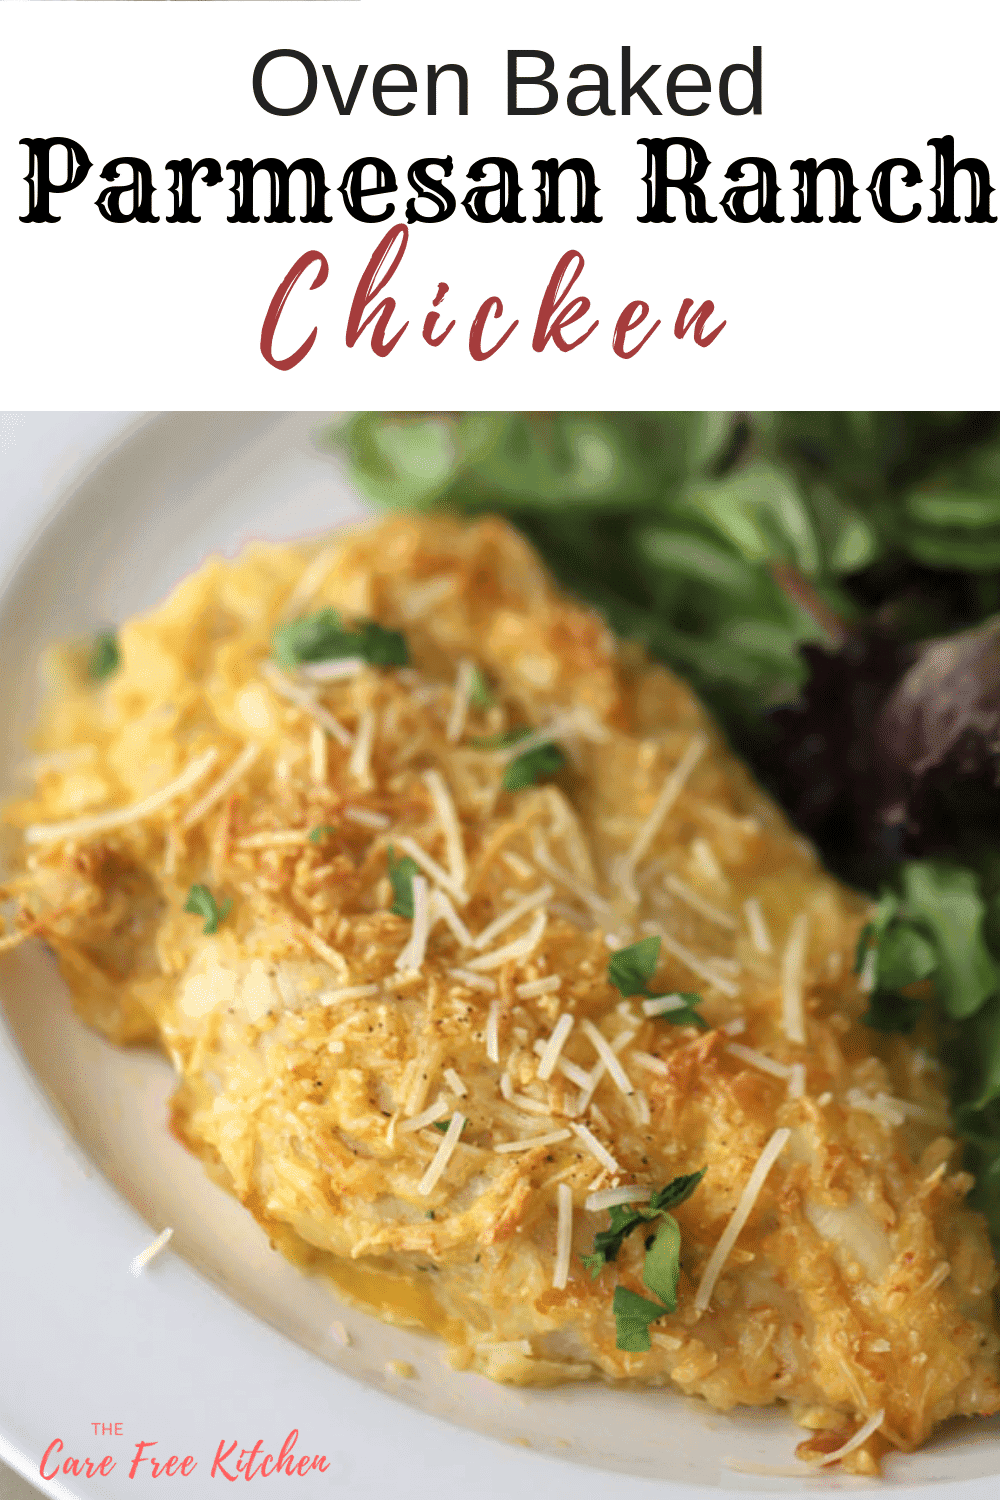 Ranch Parmesan Crusted Chicken - The Carefree Kitchen